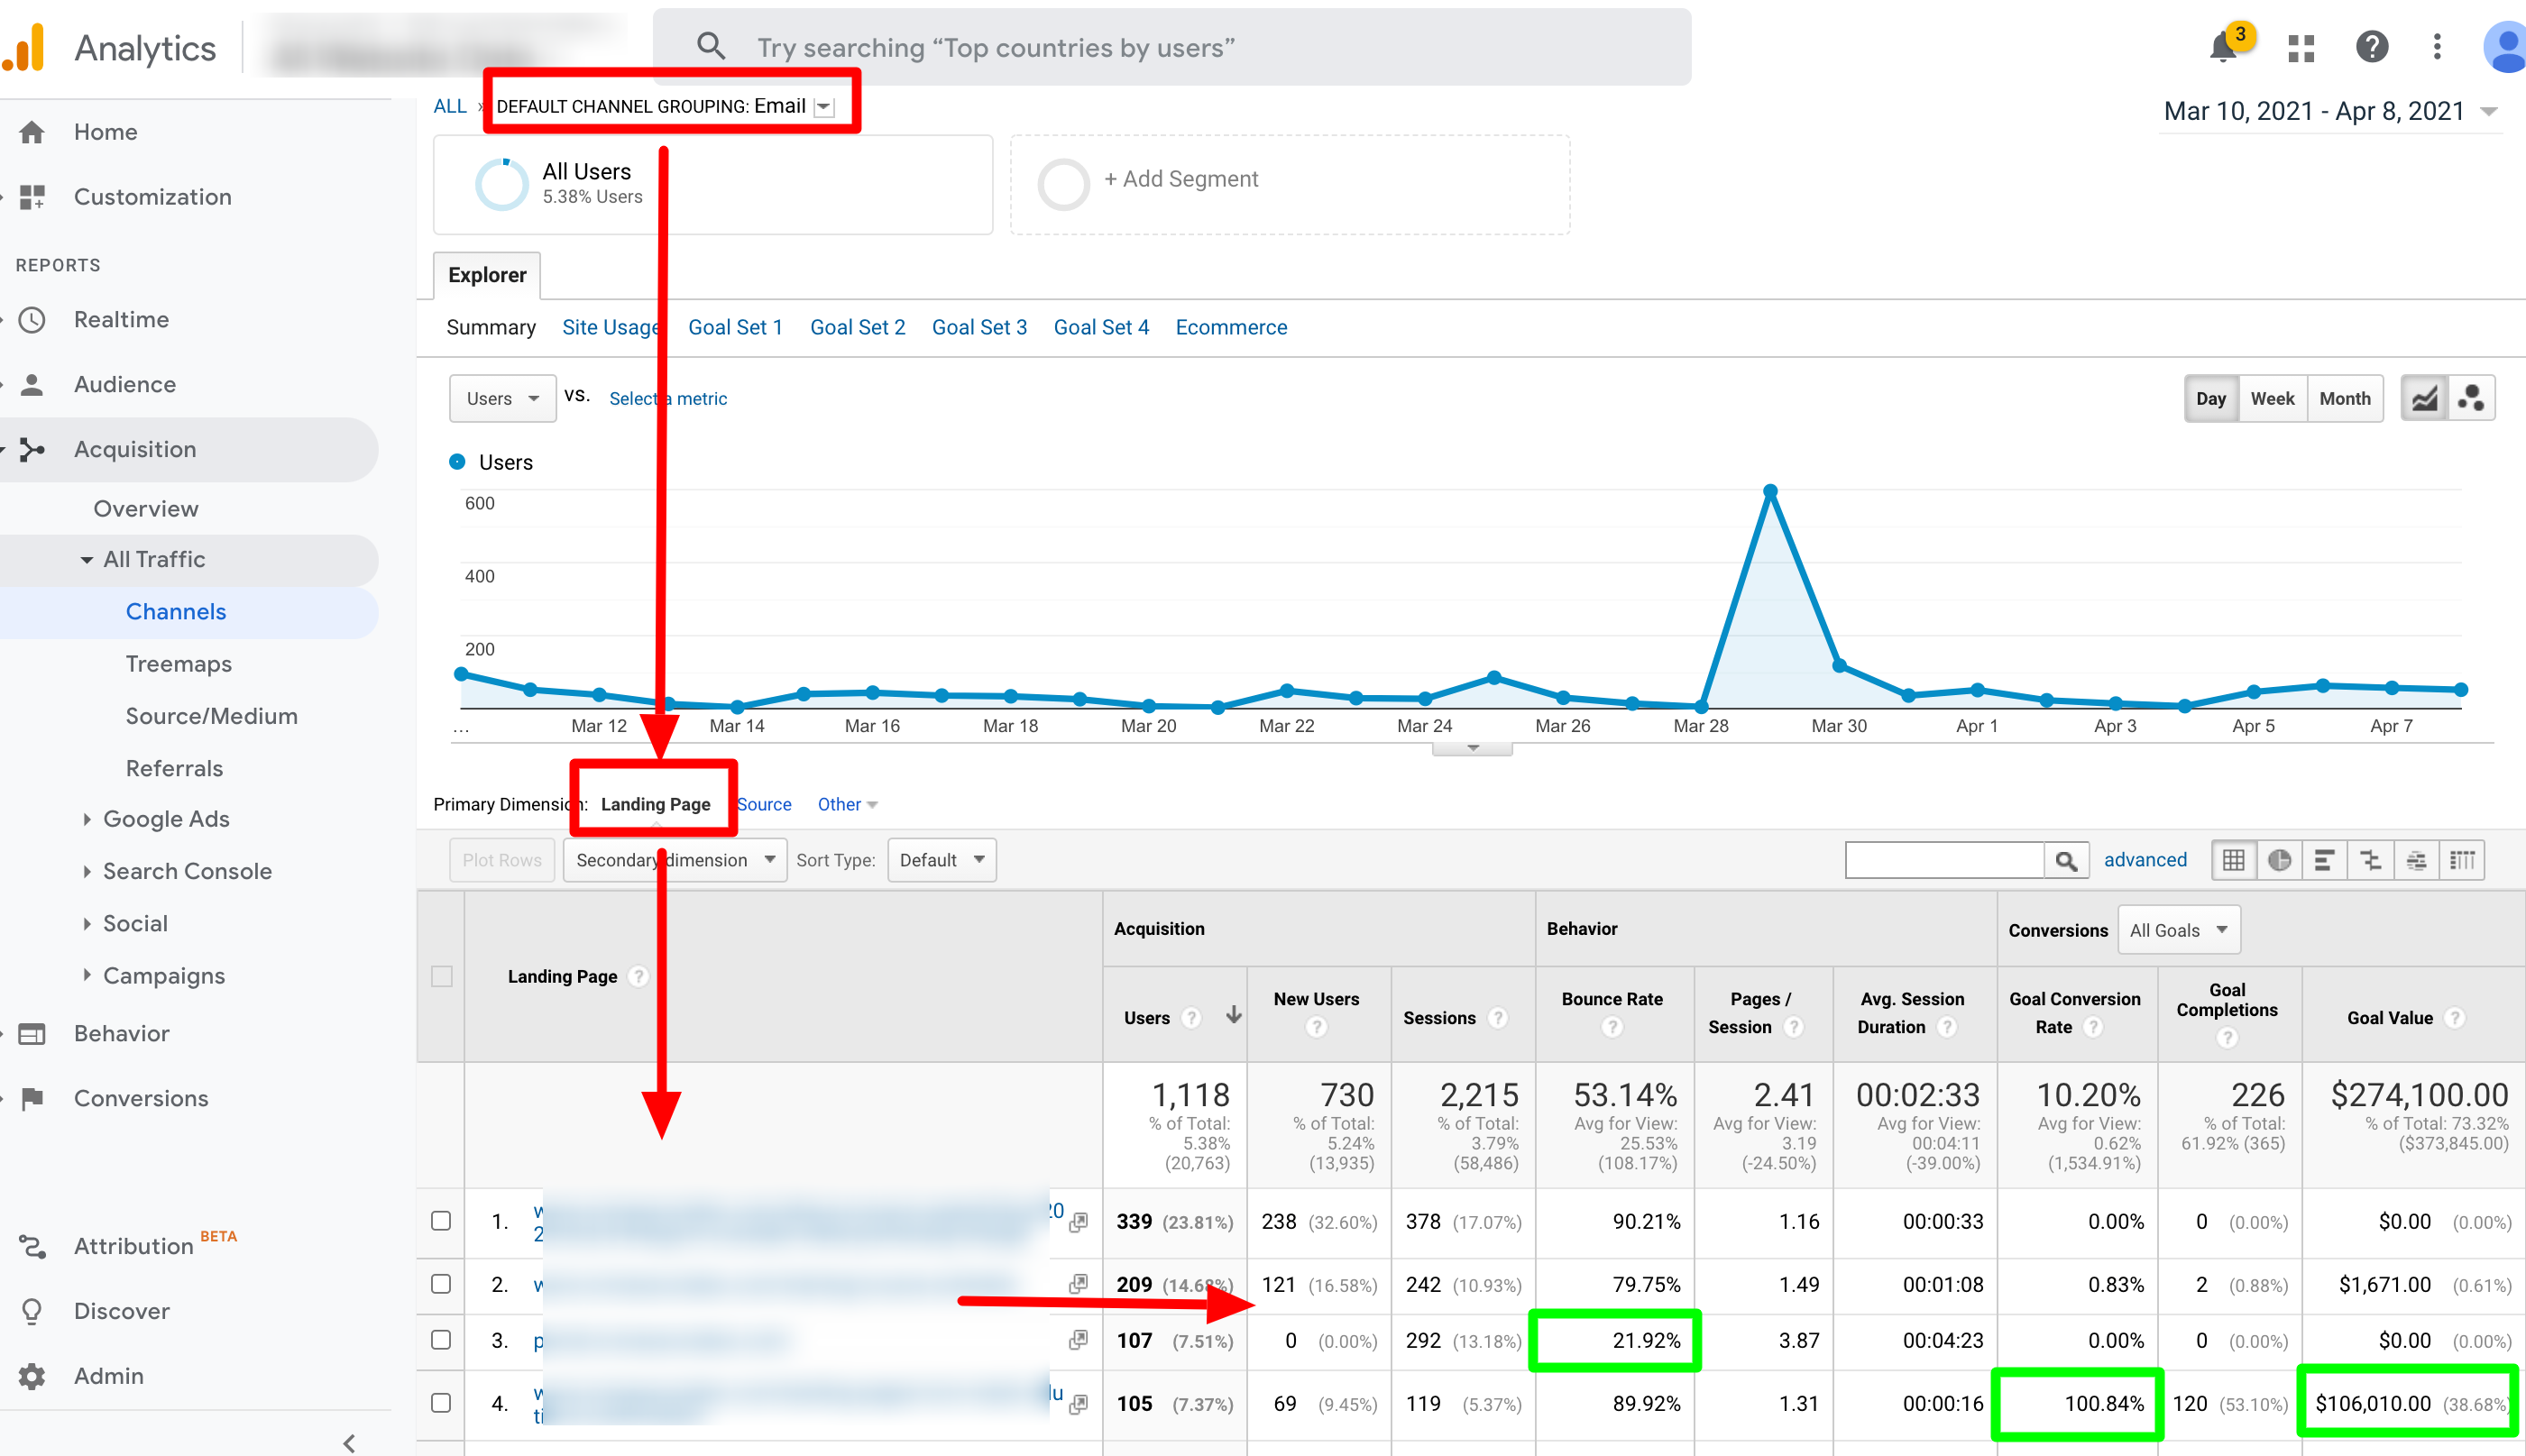 4 Ways to Use Cross-Channel Insights in Digital Marketing